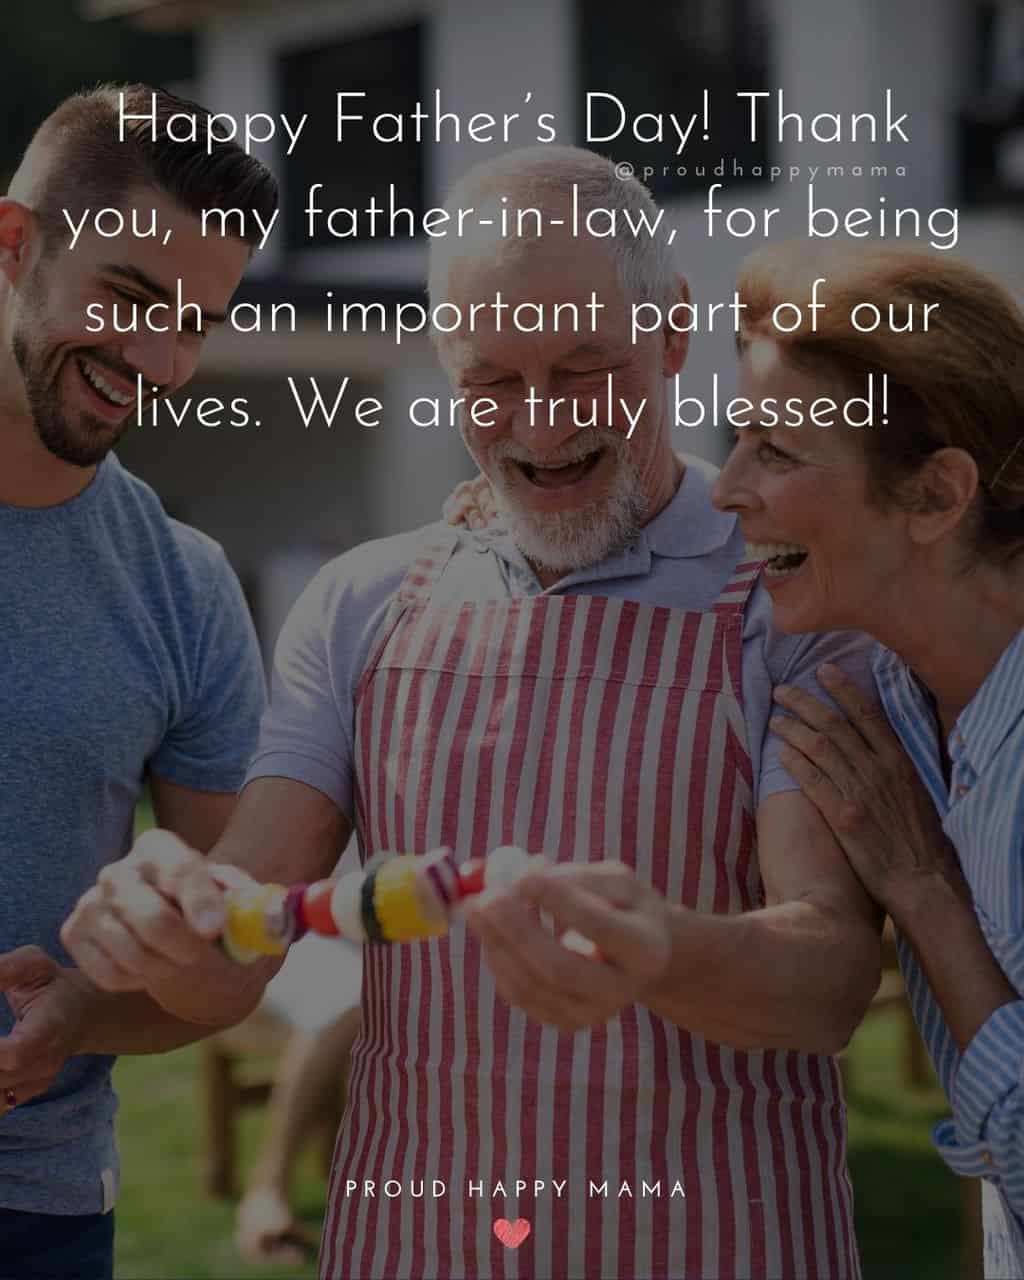 Happy Fathers Day Quotes For Father In Law - Happy Father’s Day! Thank you, my father in law, for being such an important